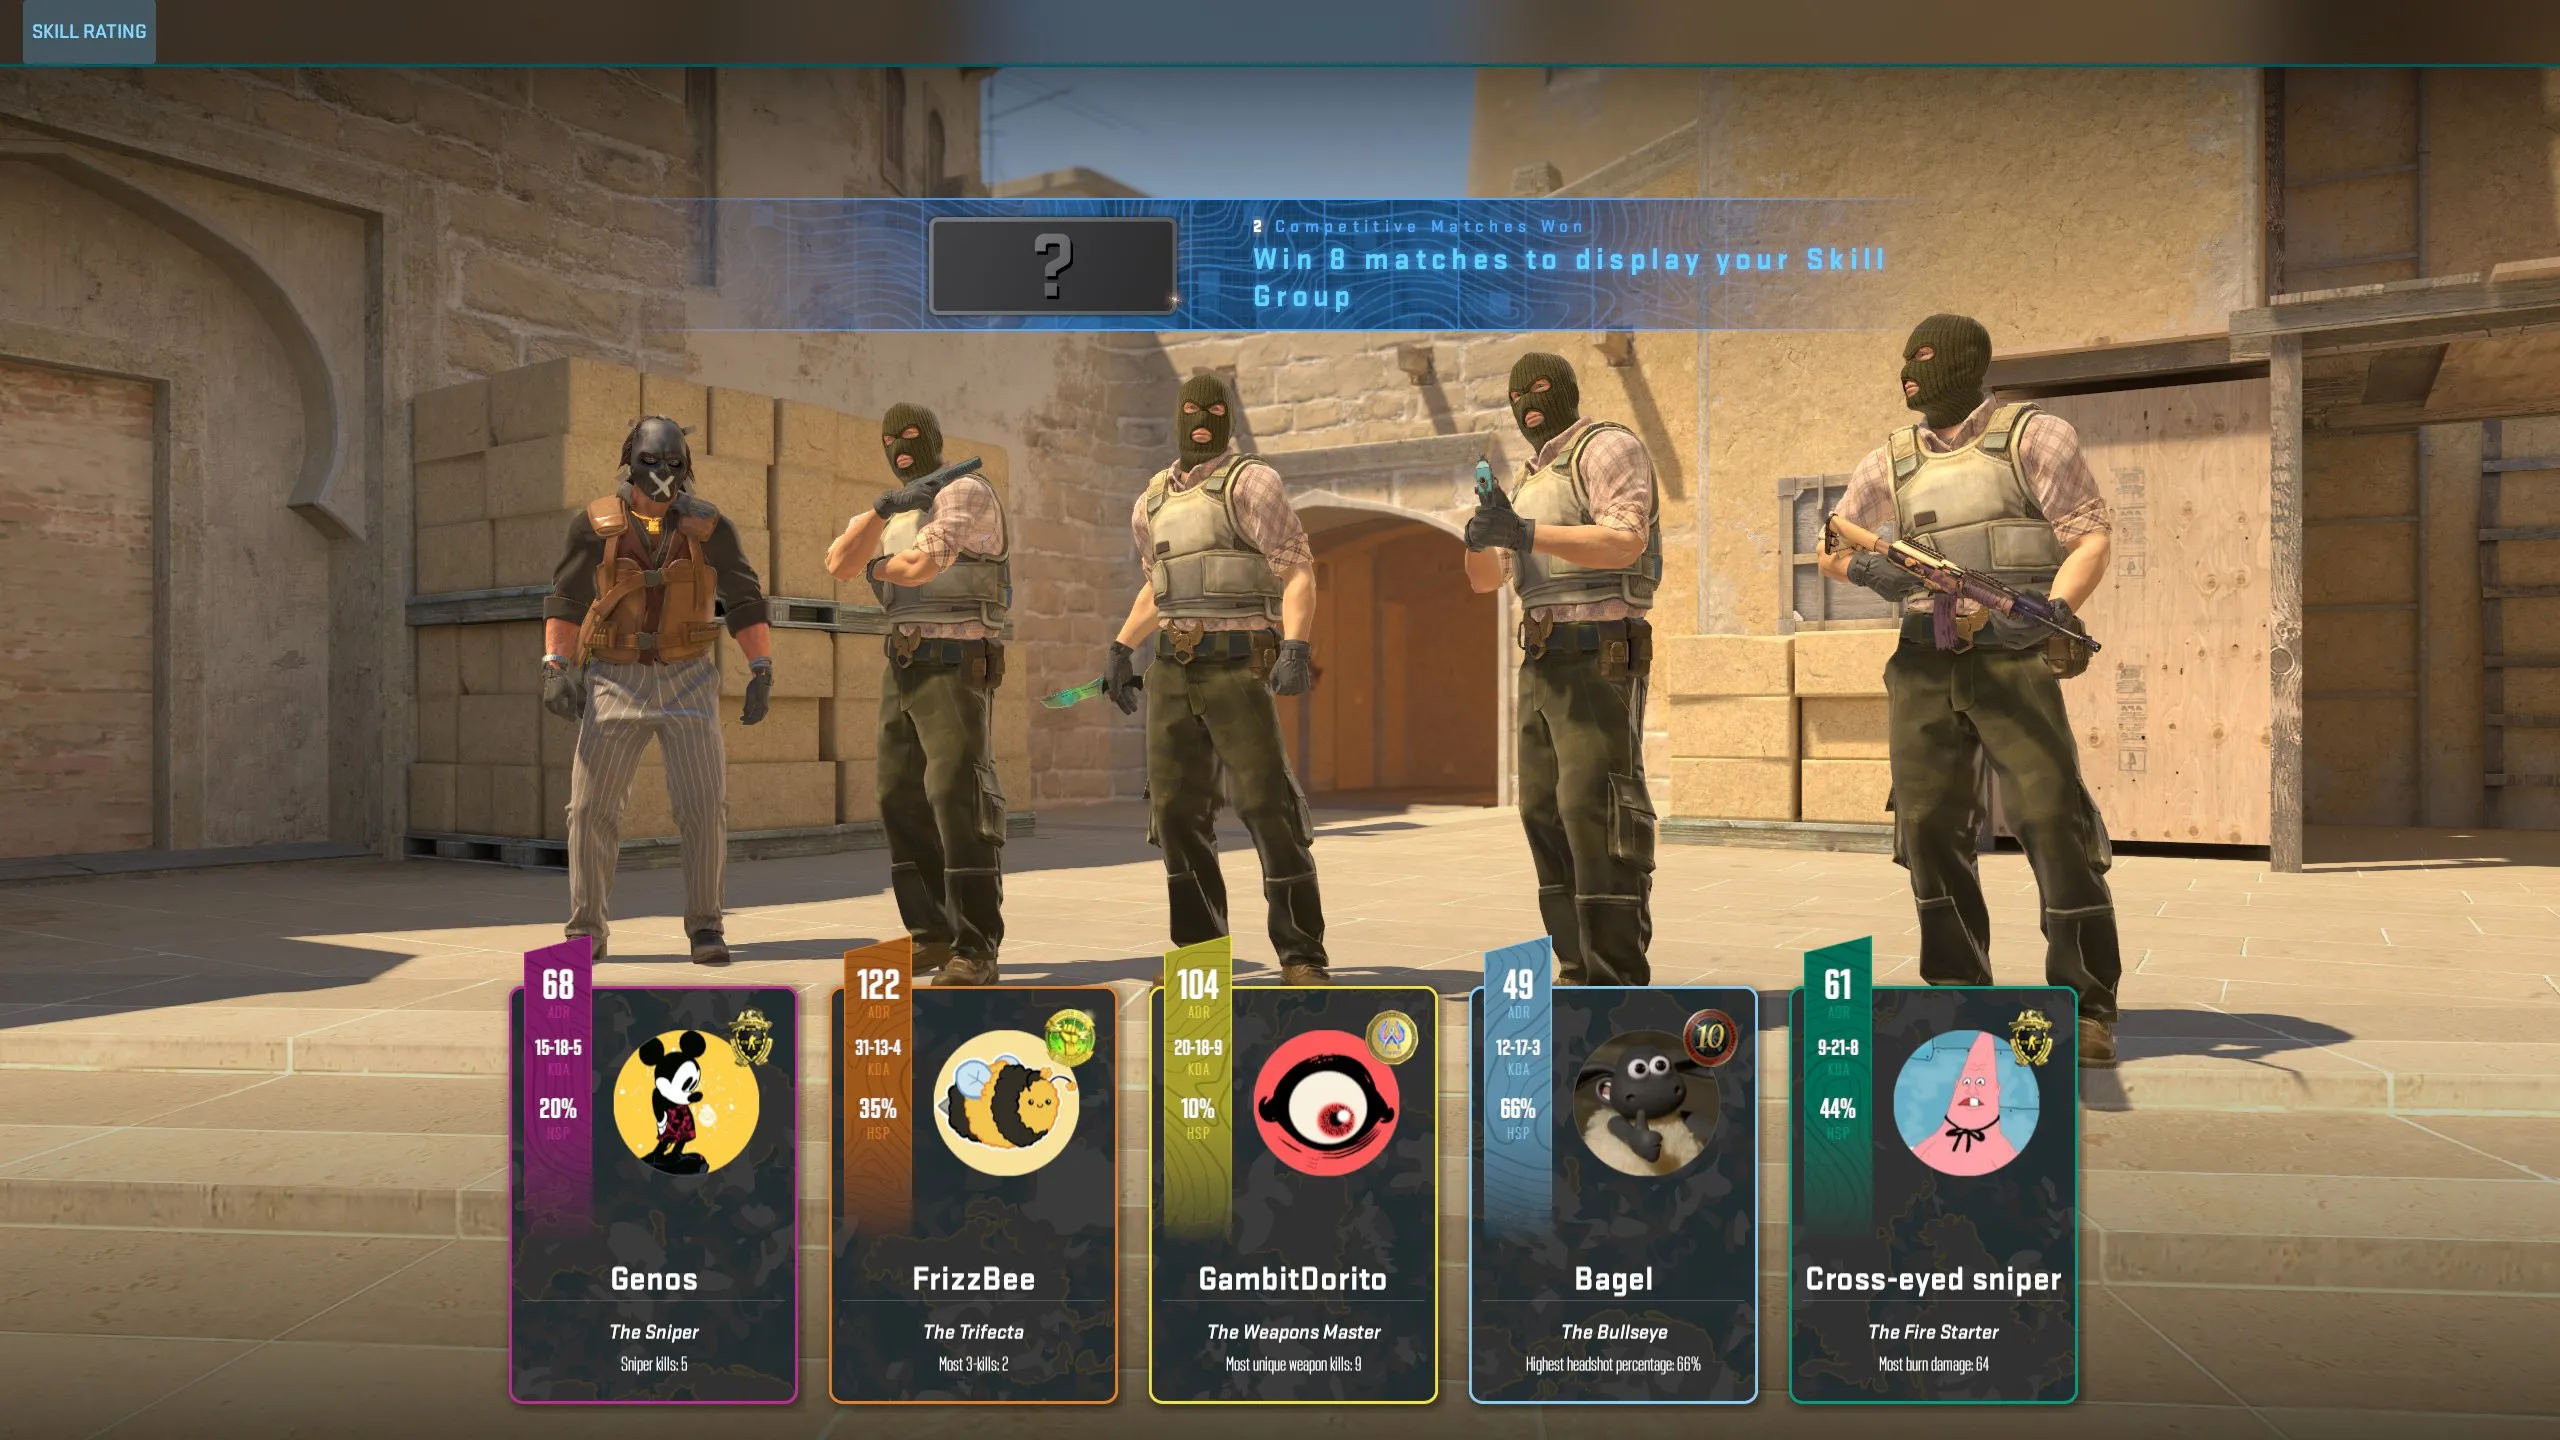 A New Counter-Strike Game With Better Graphics And Matchmaking